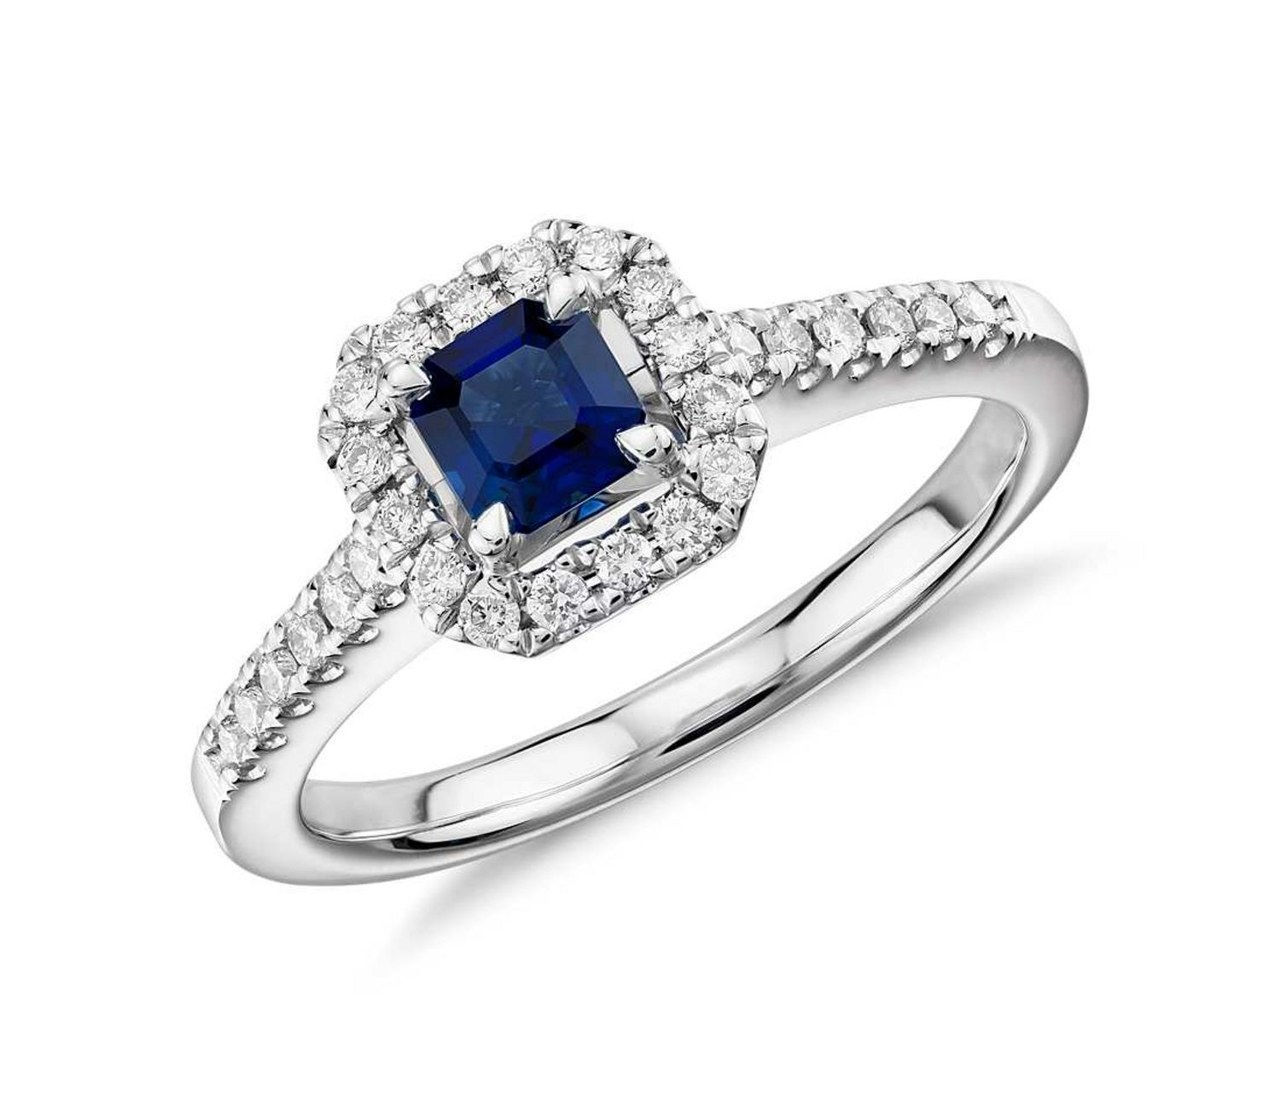 12 affordable engagement rings under 1000 1116 courtesy